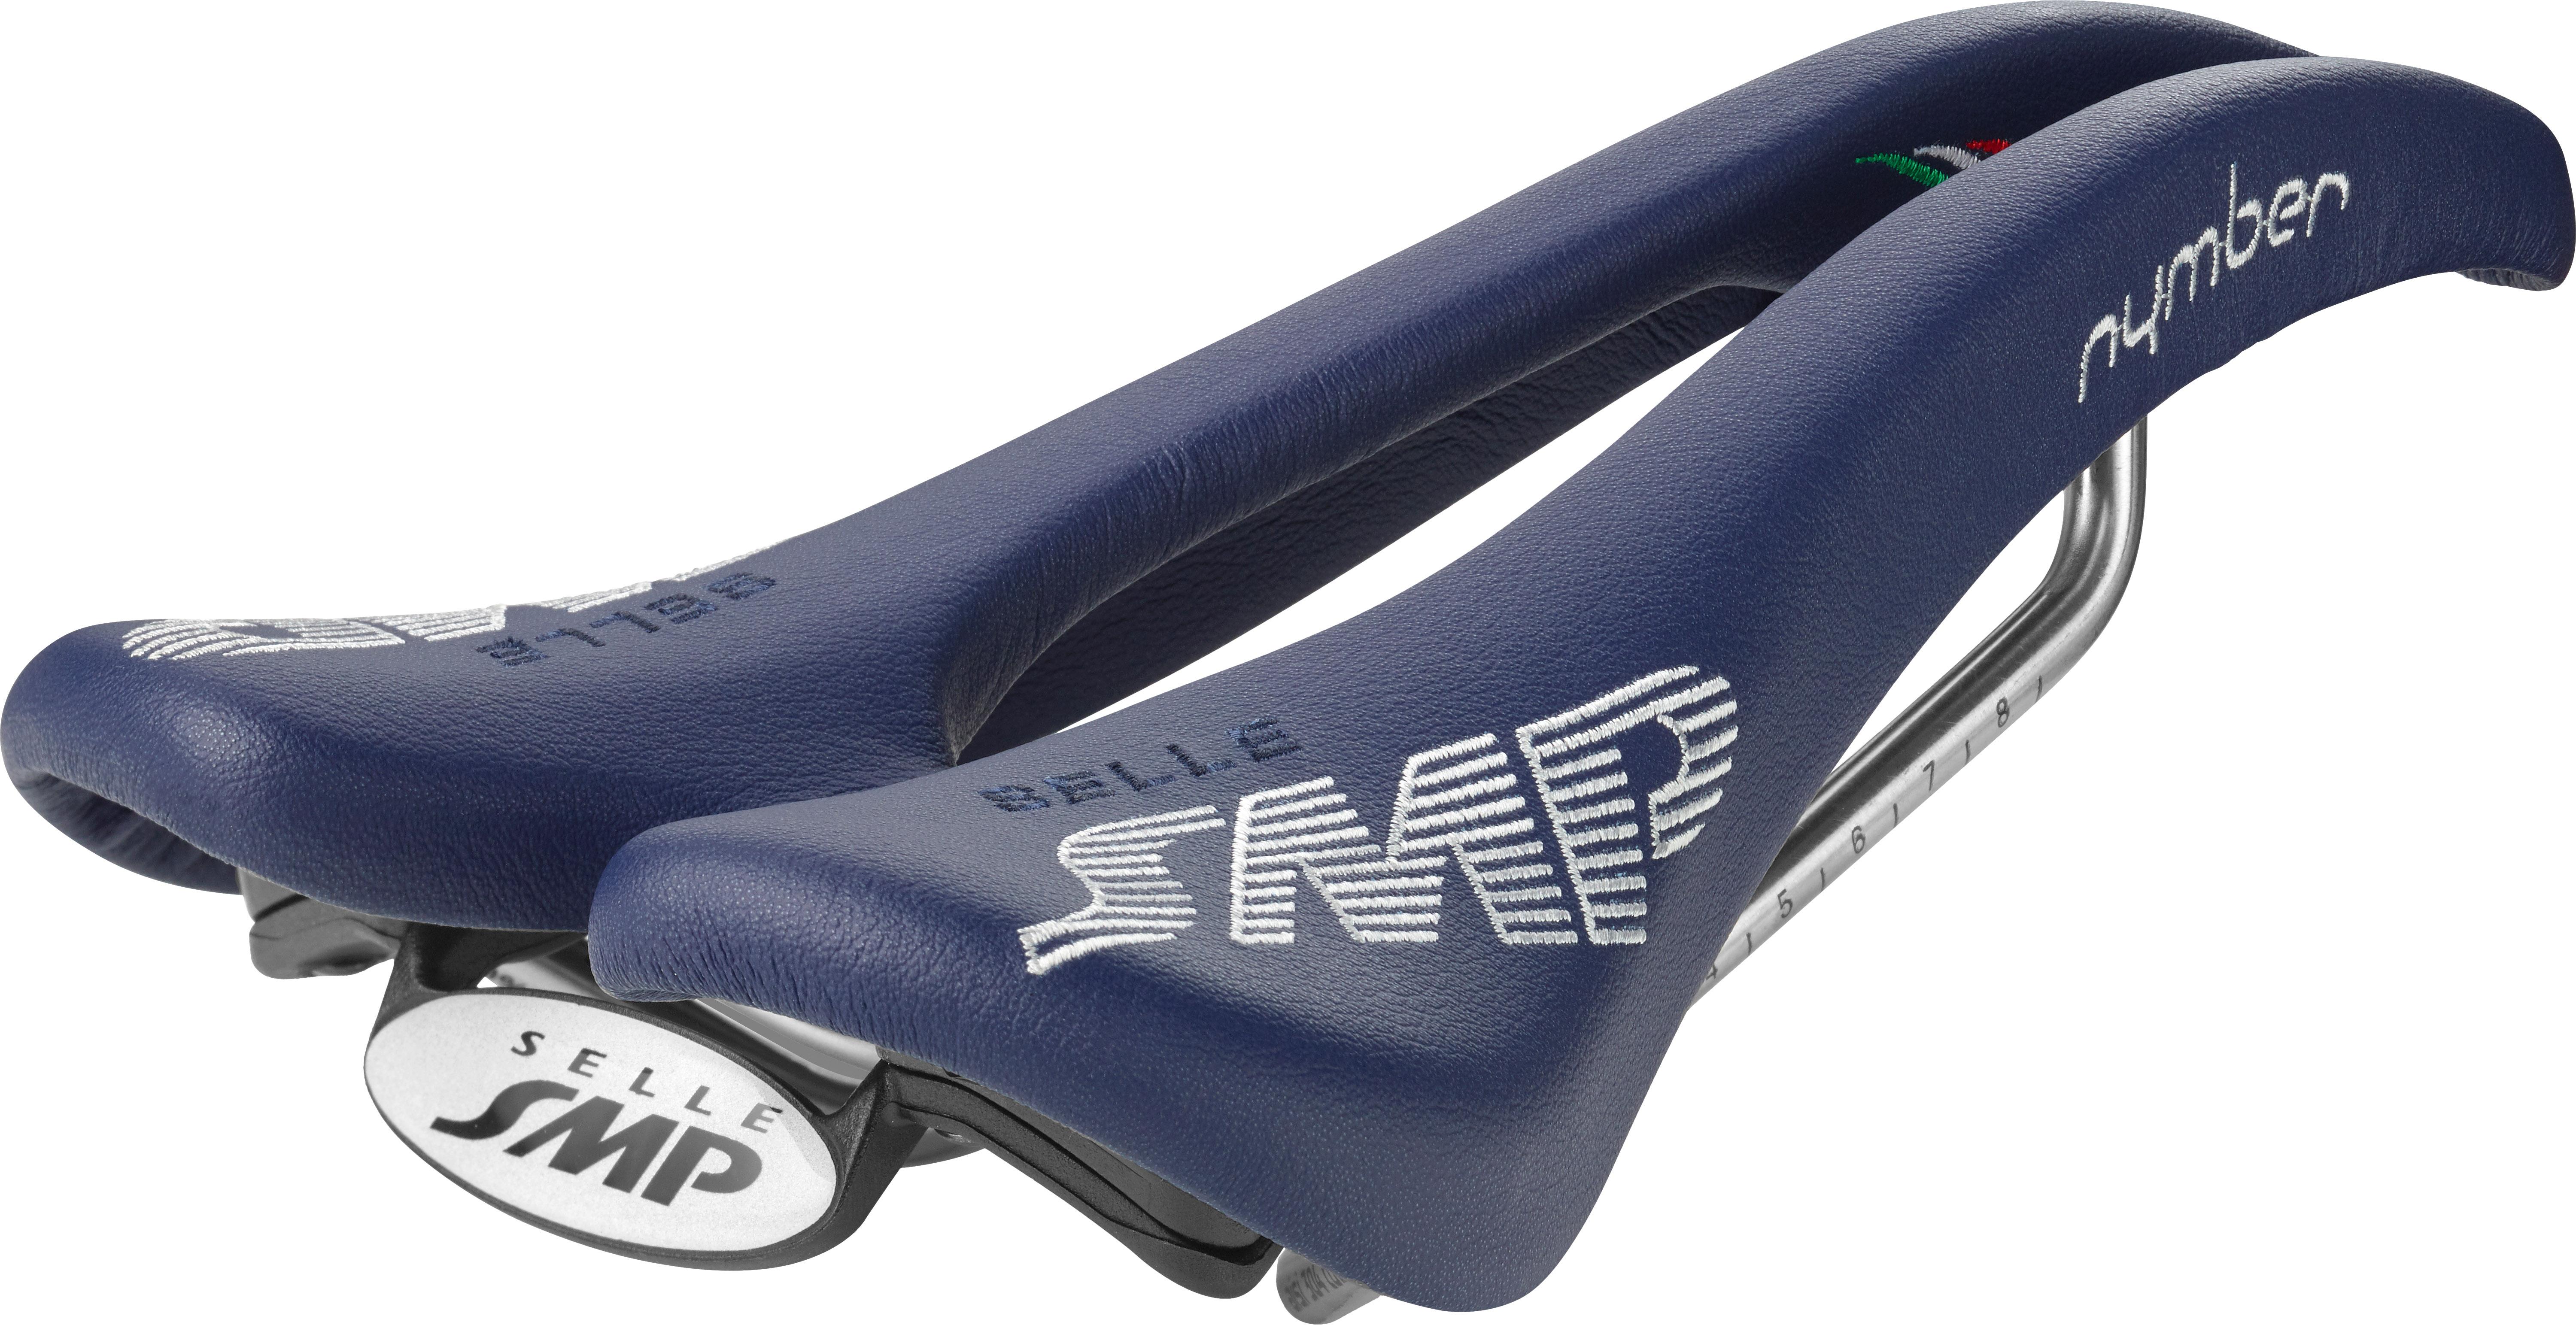 Selle Smp Nymber Saddle - Blue